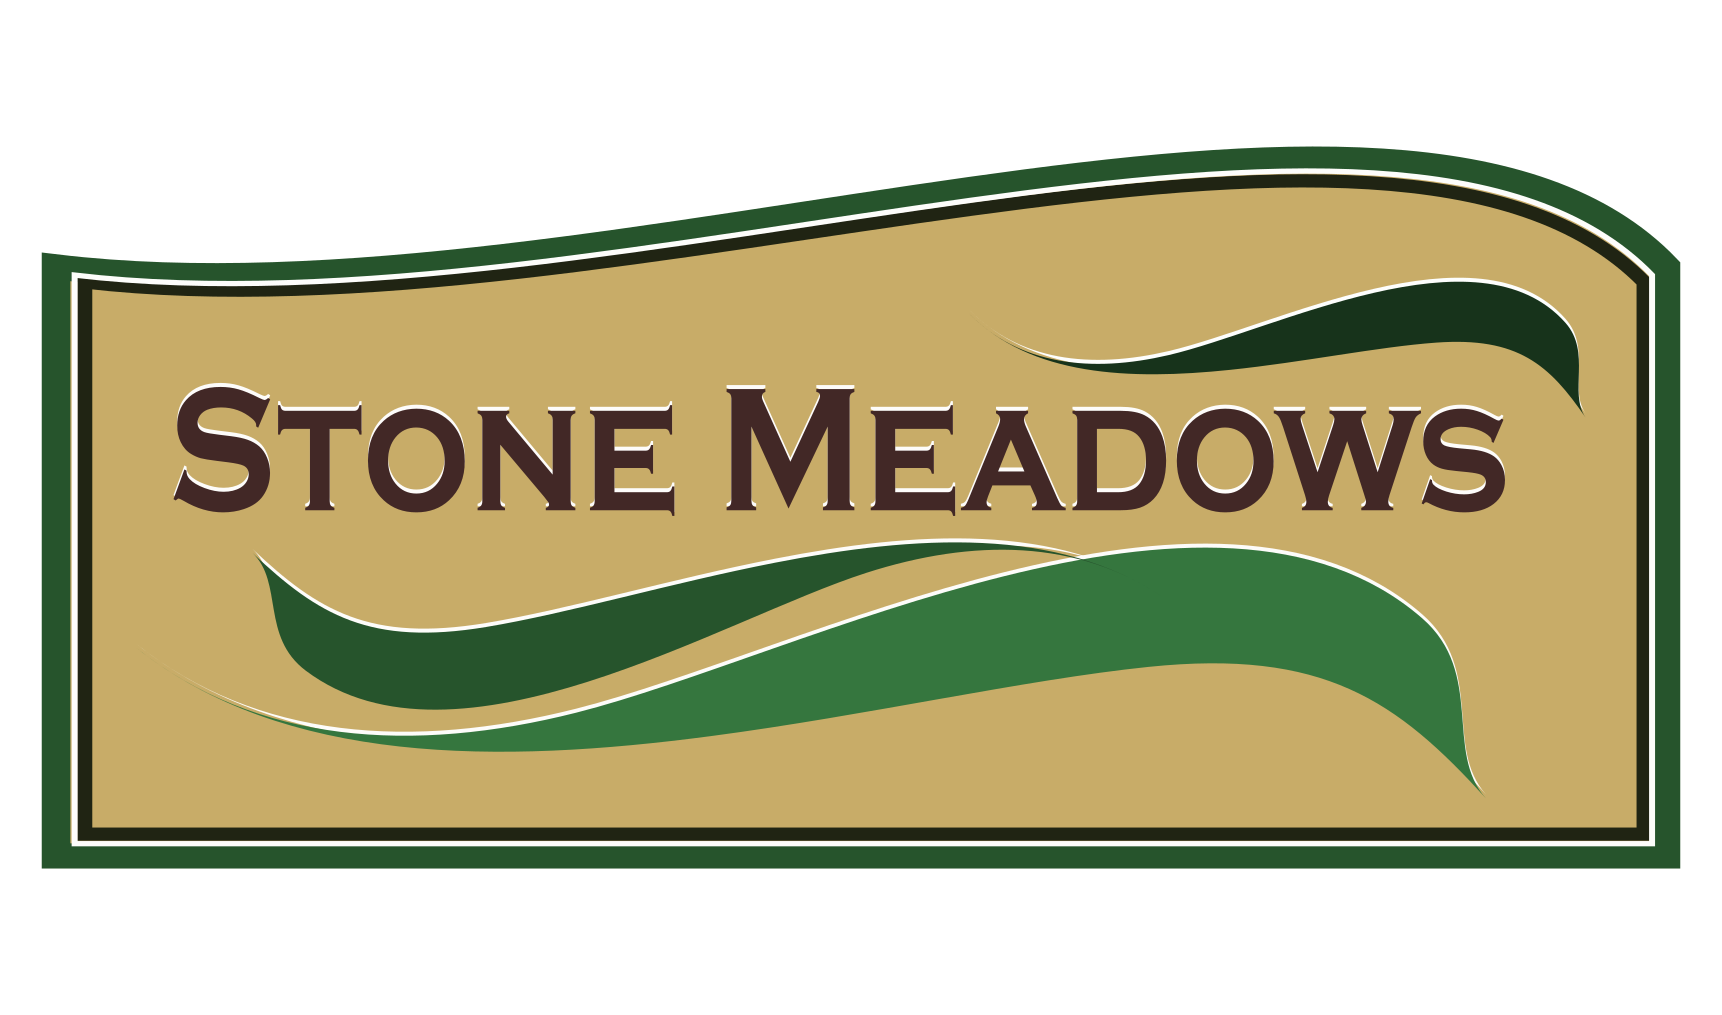 Stone Meadows  — Convenient to Everywhere